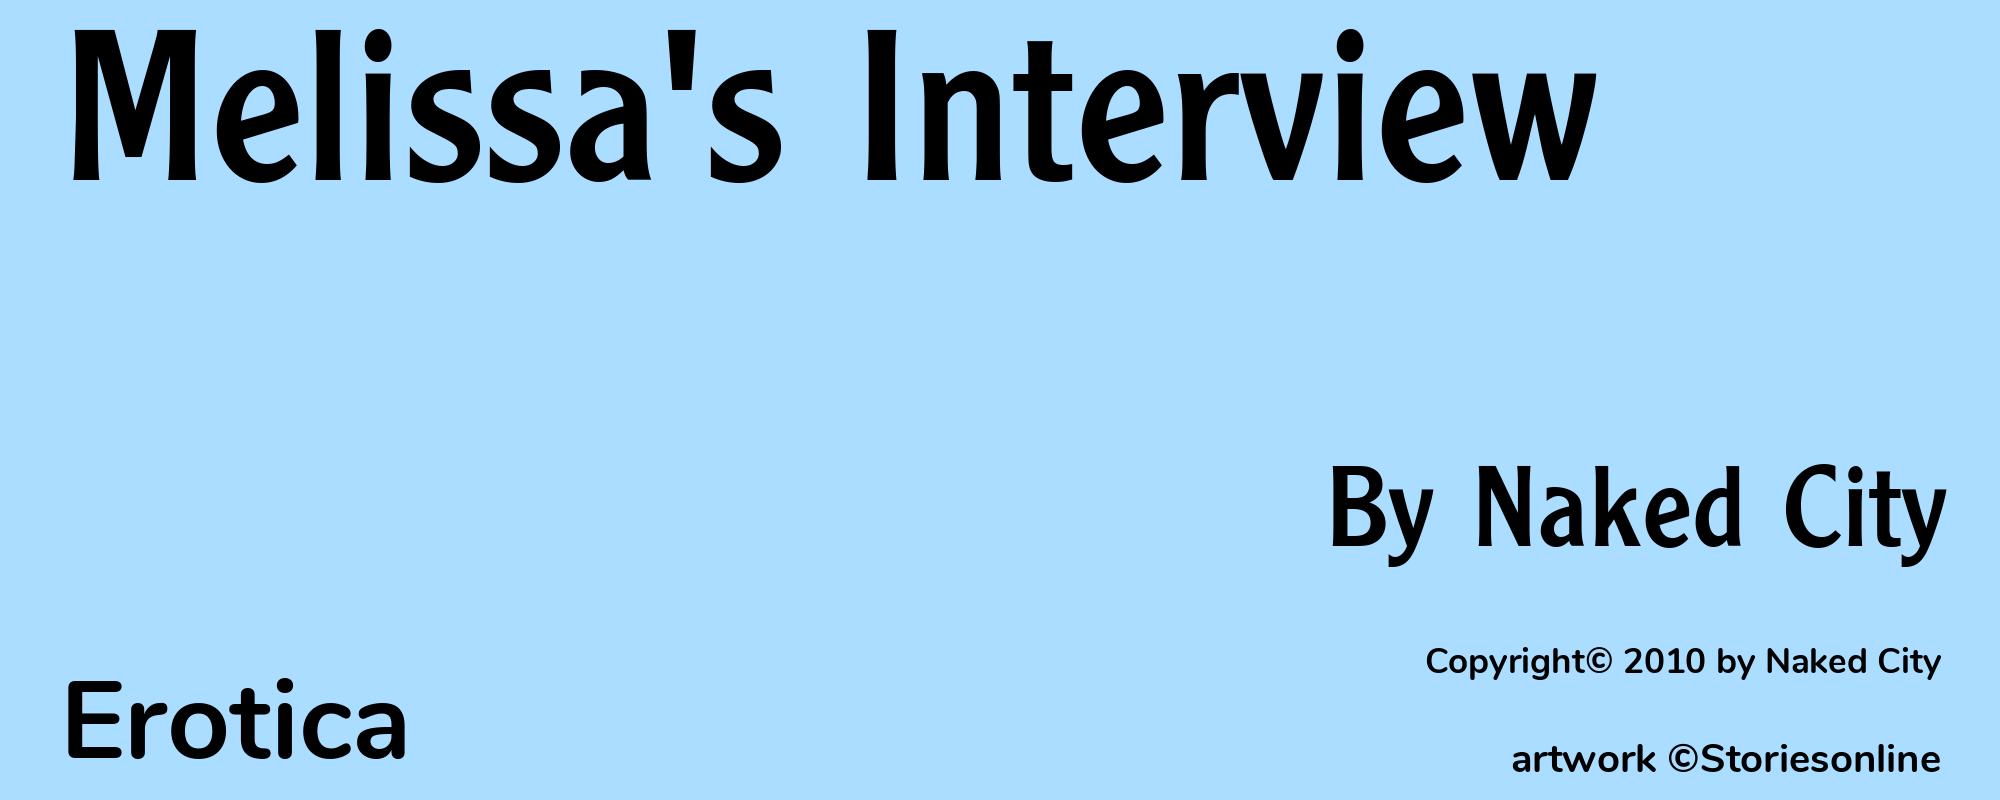 Melissa's Interview - Cover